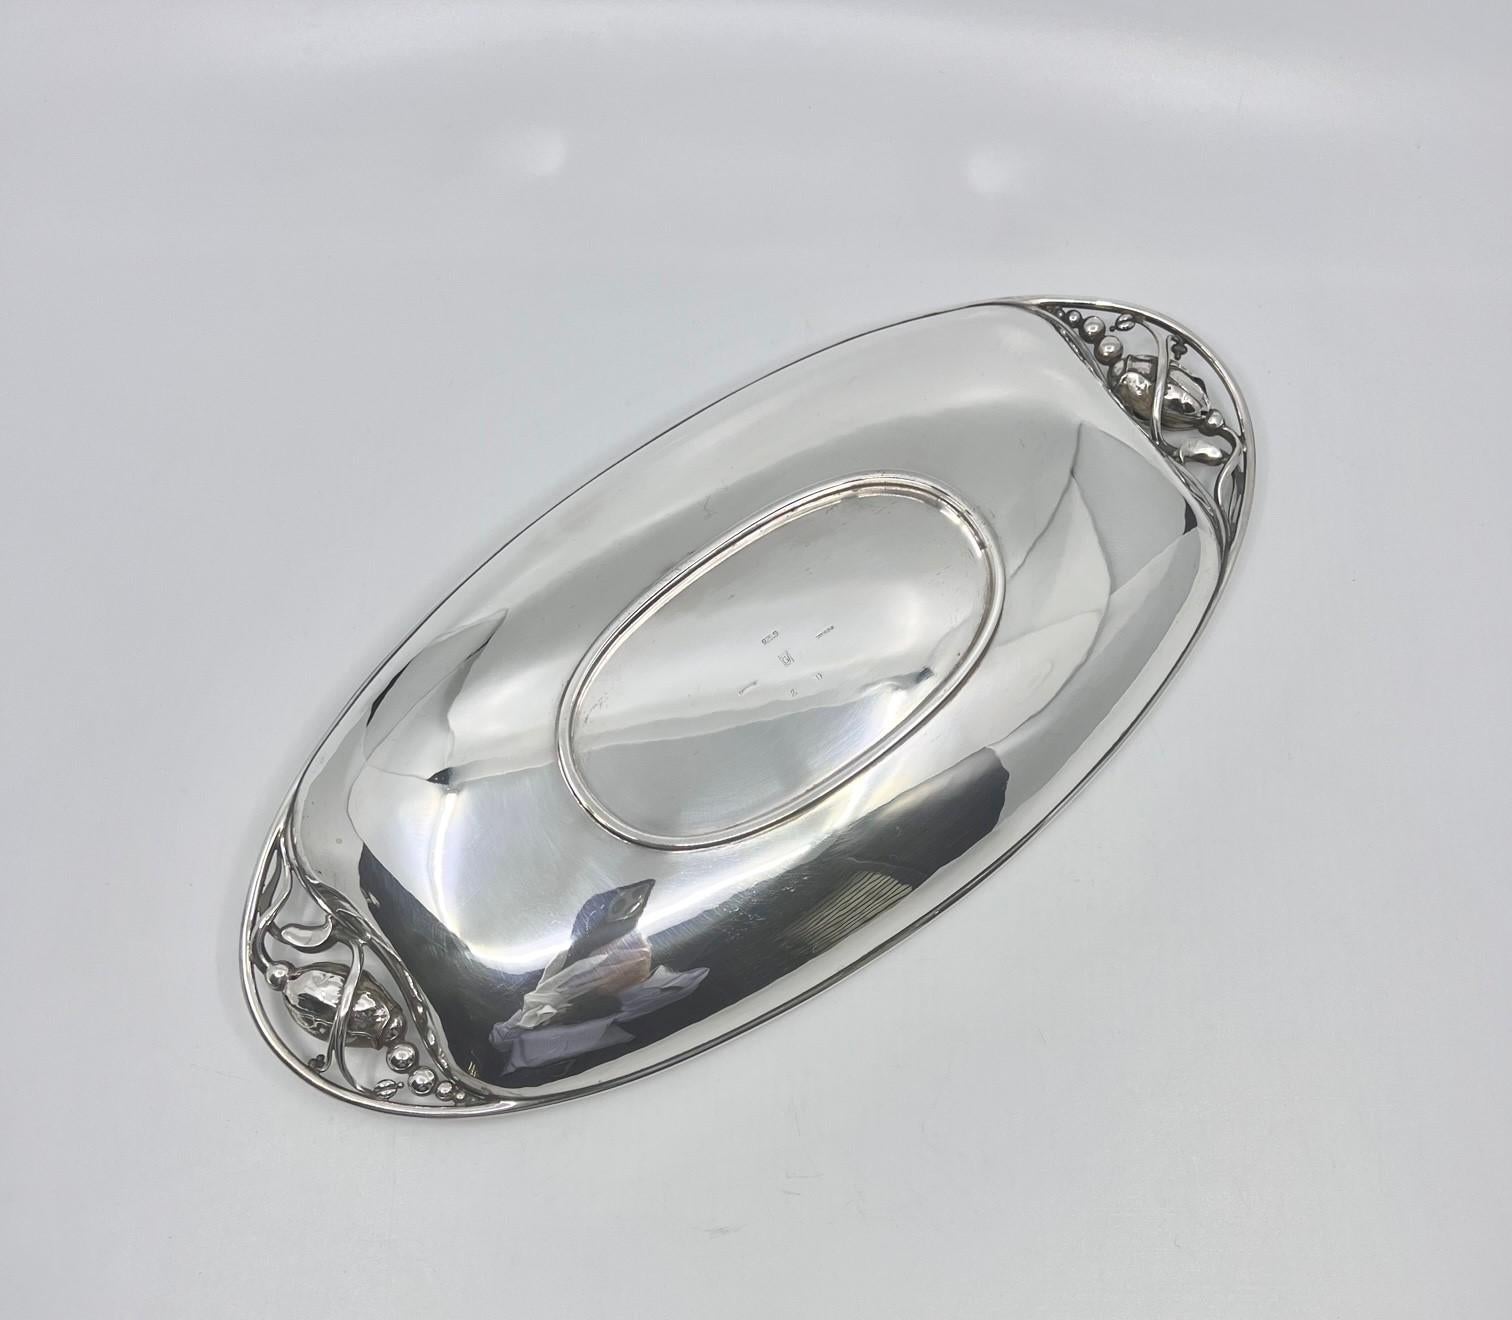 Hand-Crafted Georg Jensen Blossom Sterling Silver Bread Tray #2D For Sale